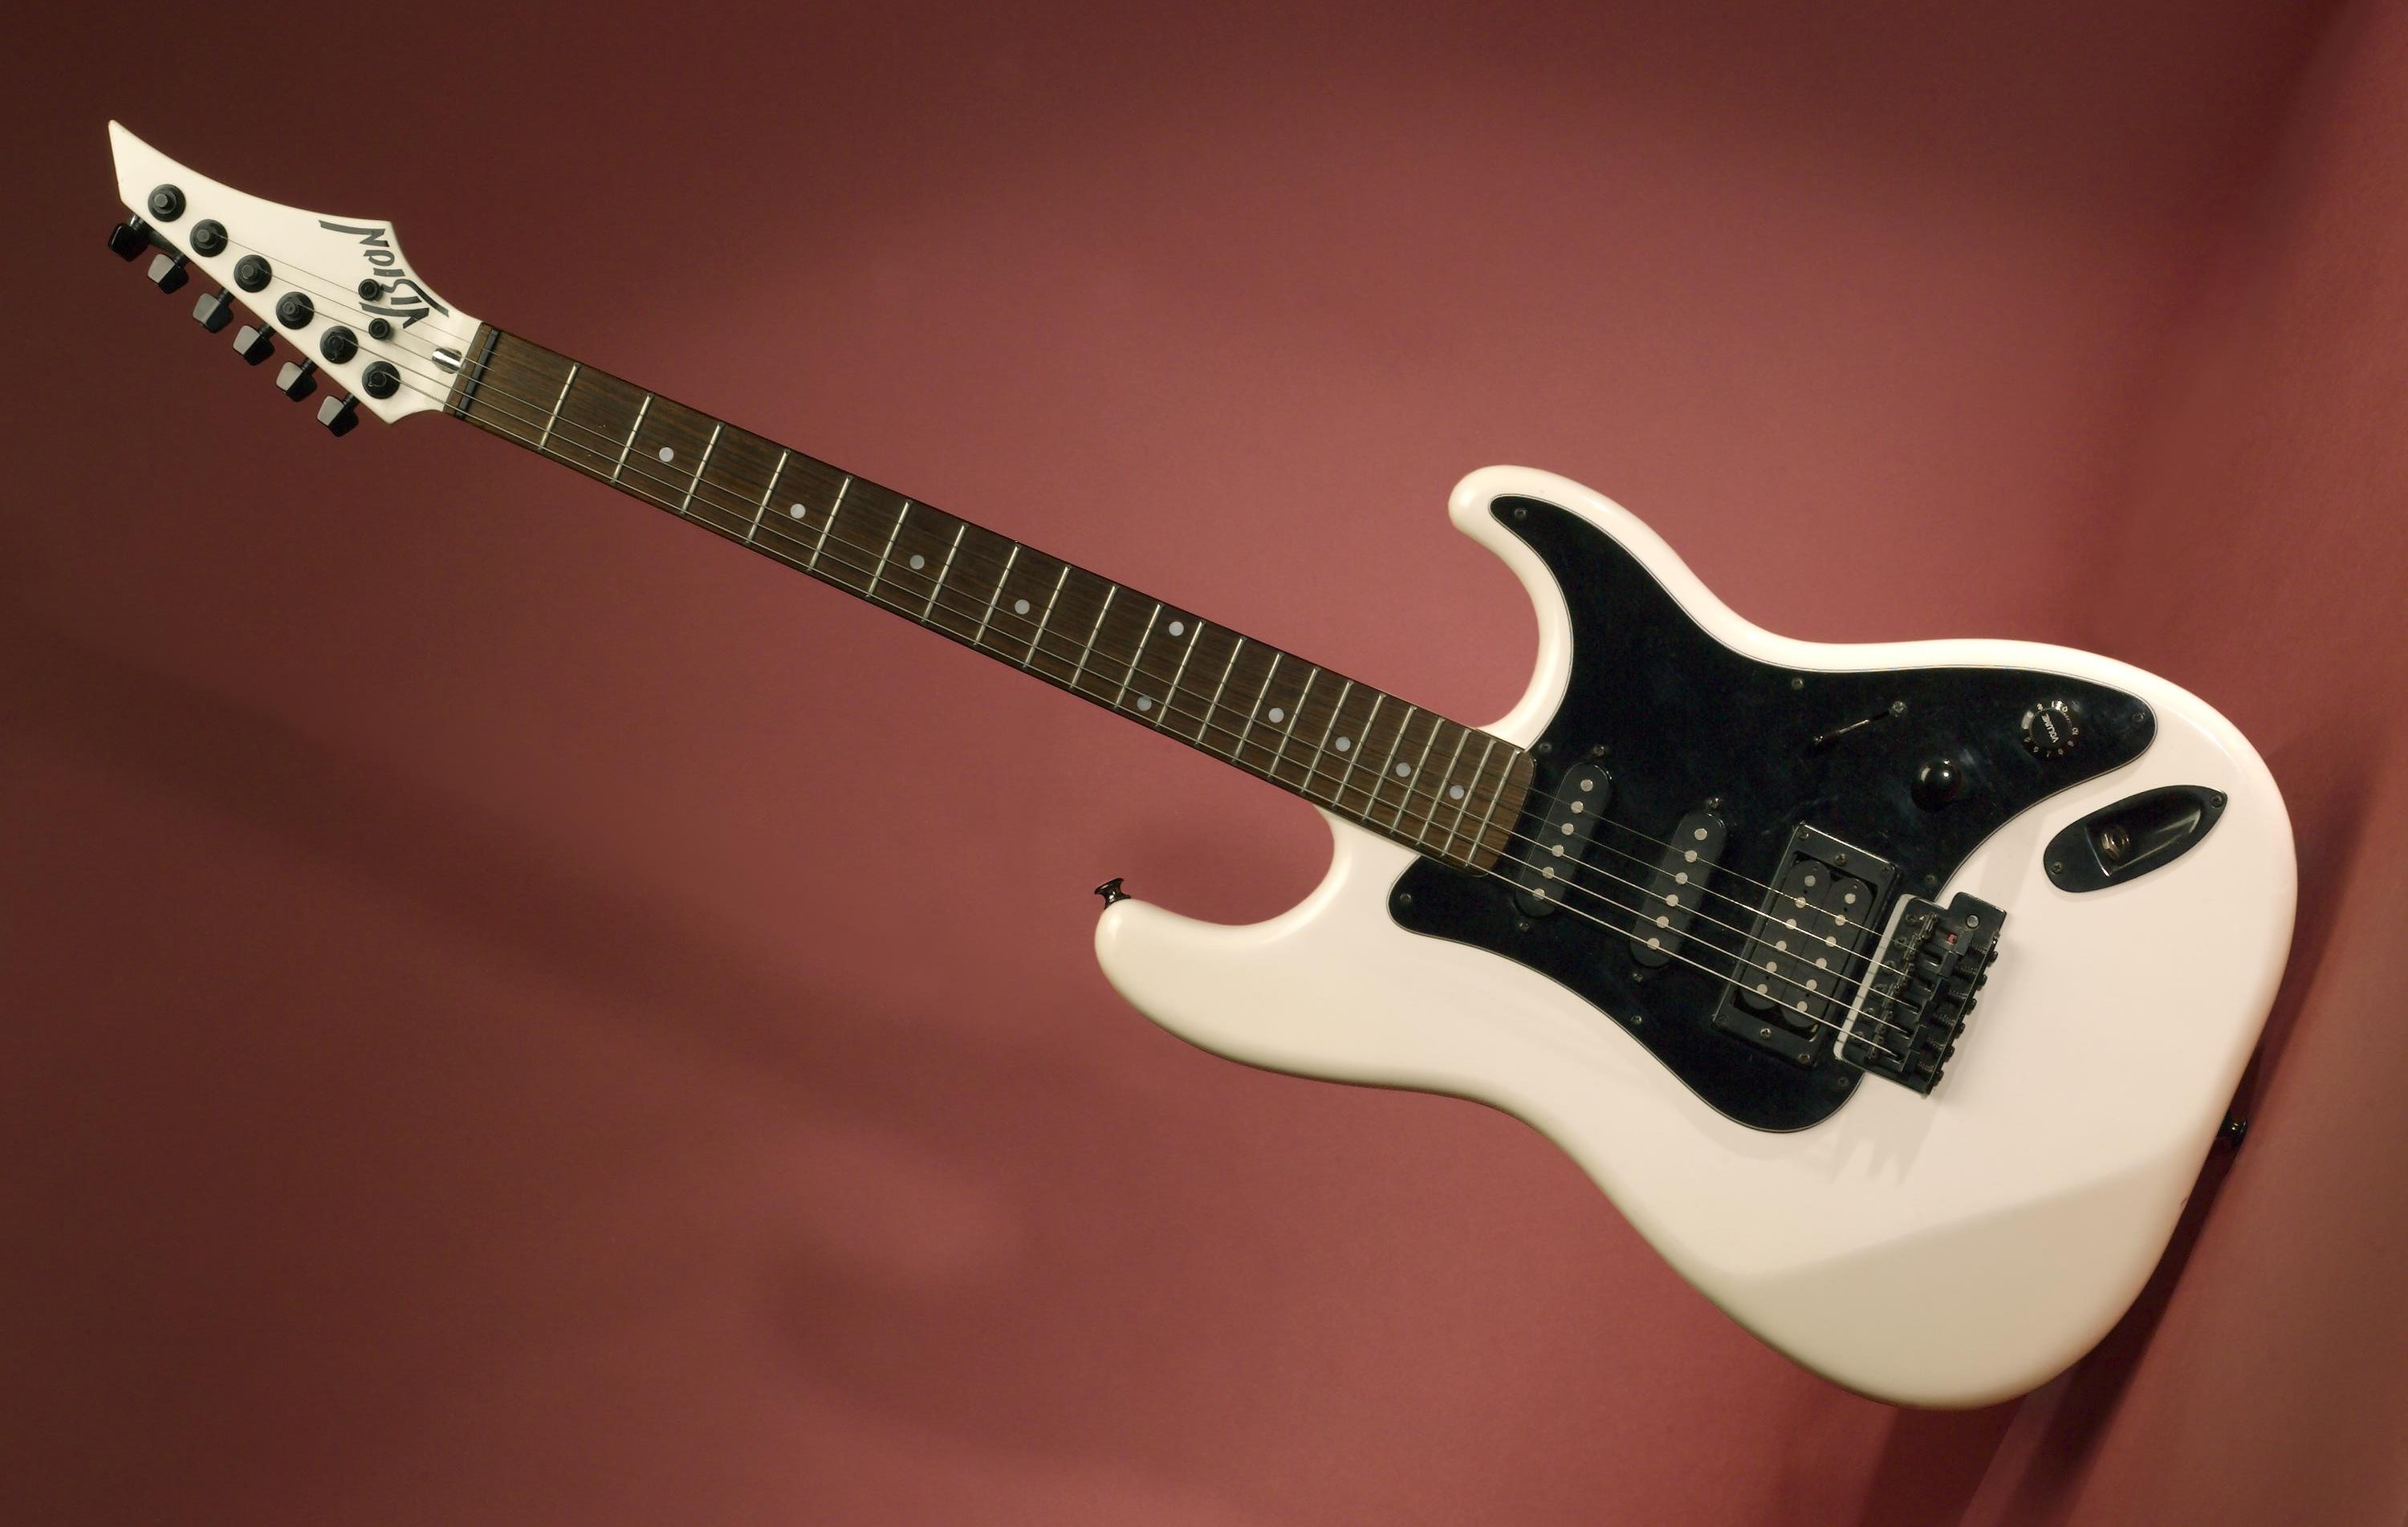 Electric guitar from the Science Museum Group collection